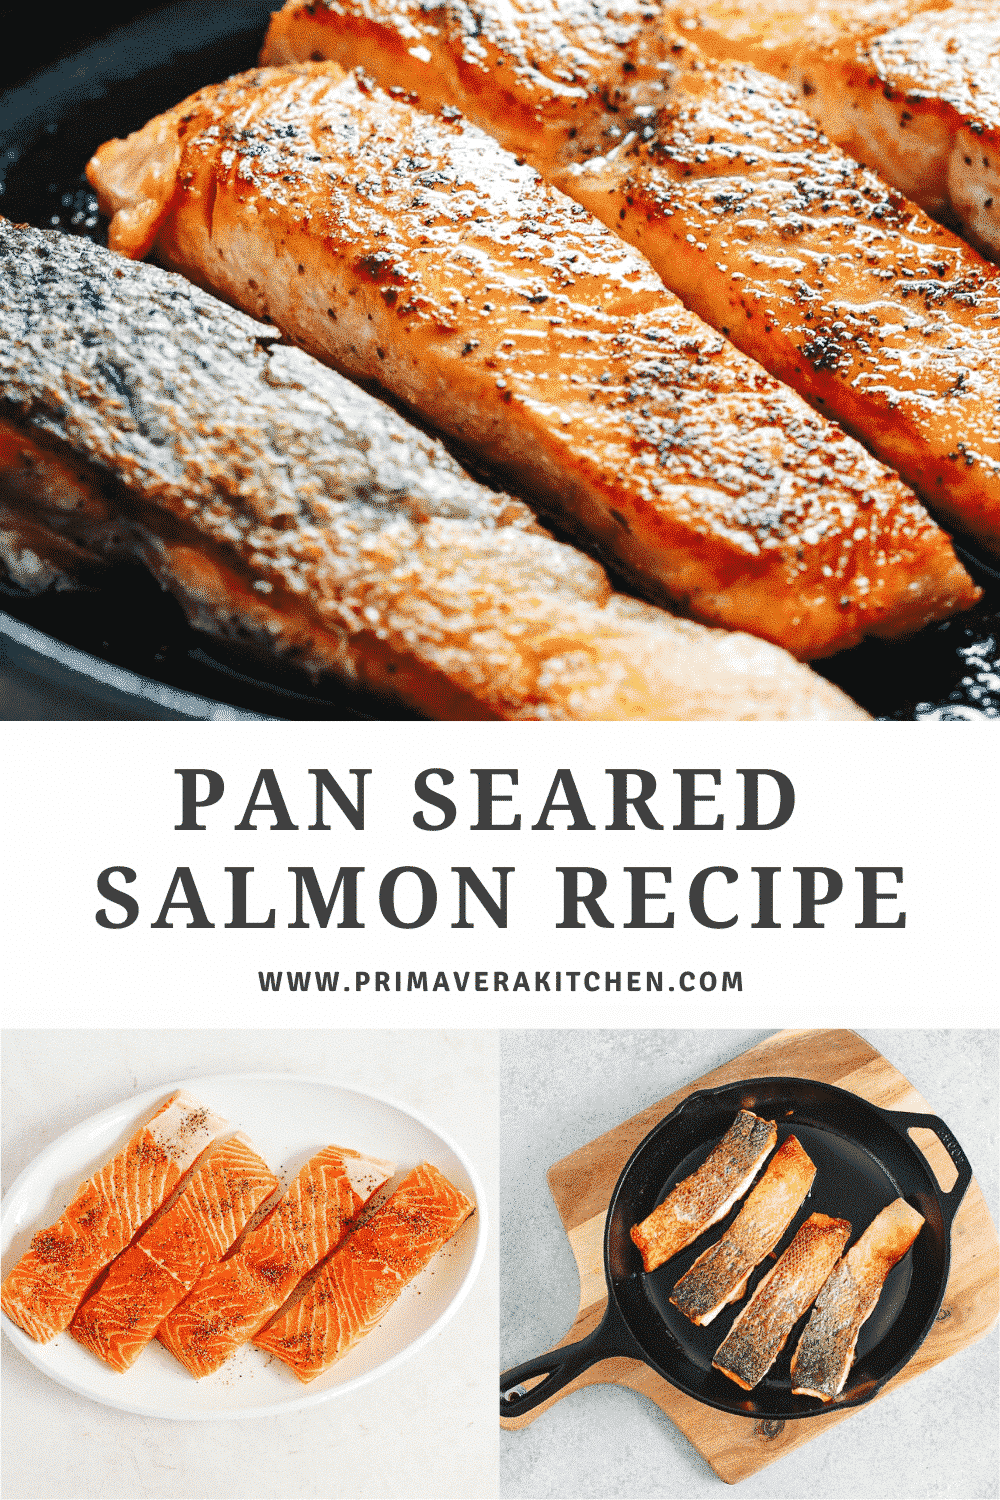 A close up of cast iron skillet containing seared salmon